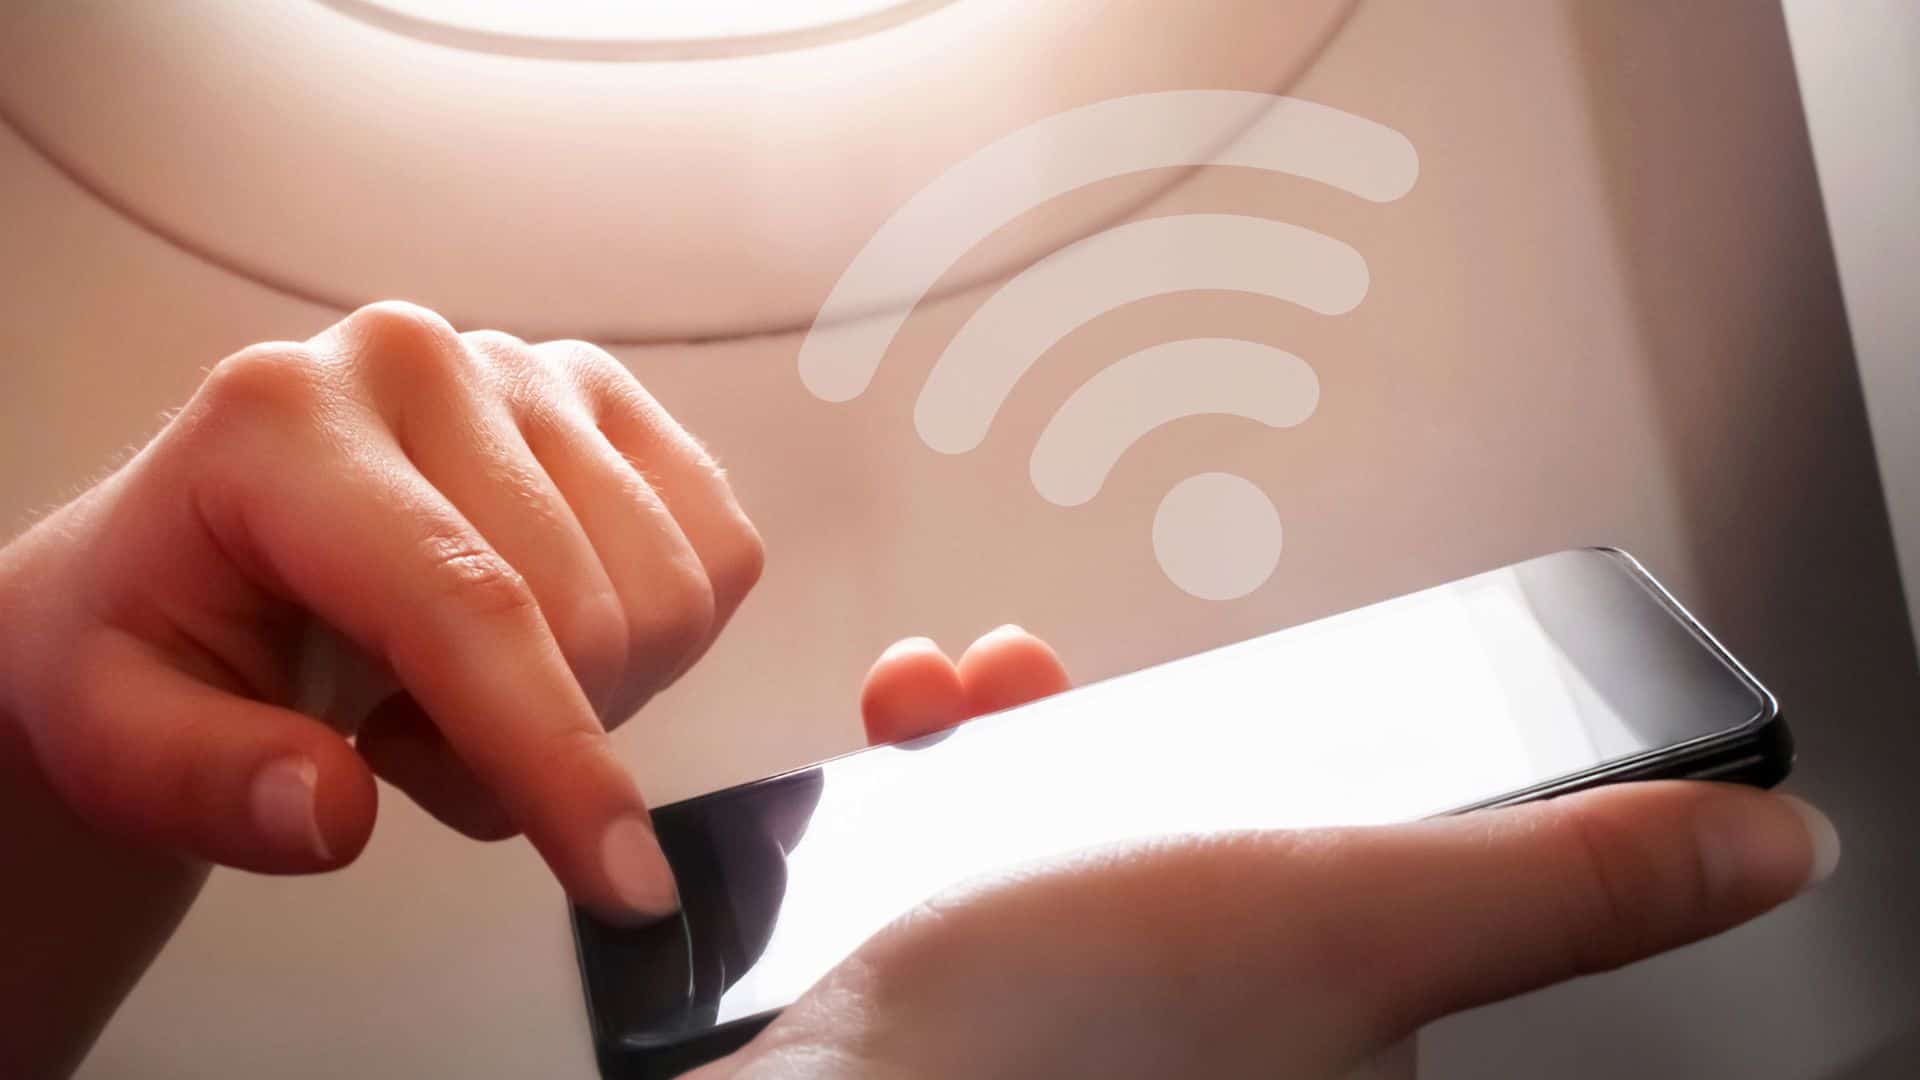 Can You Use Data on A Plane?